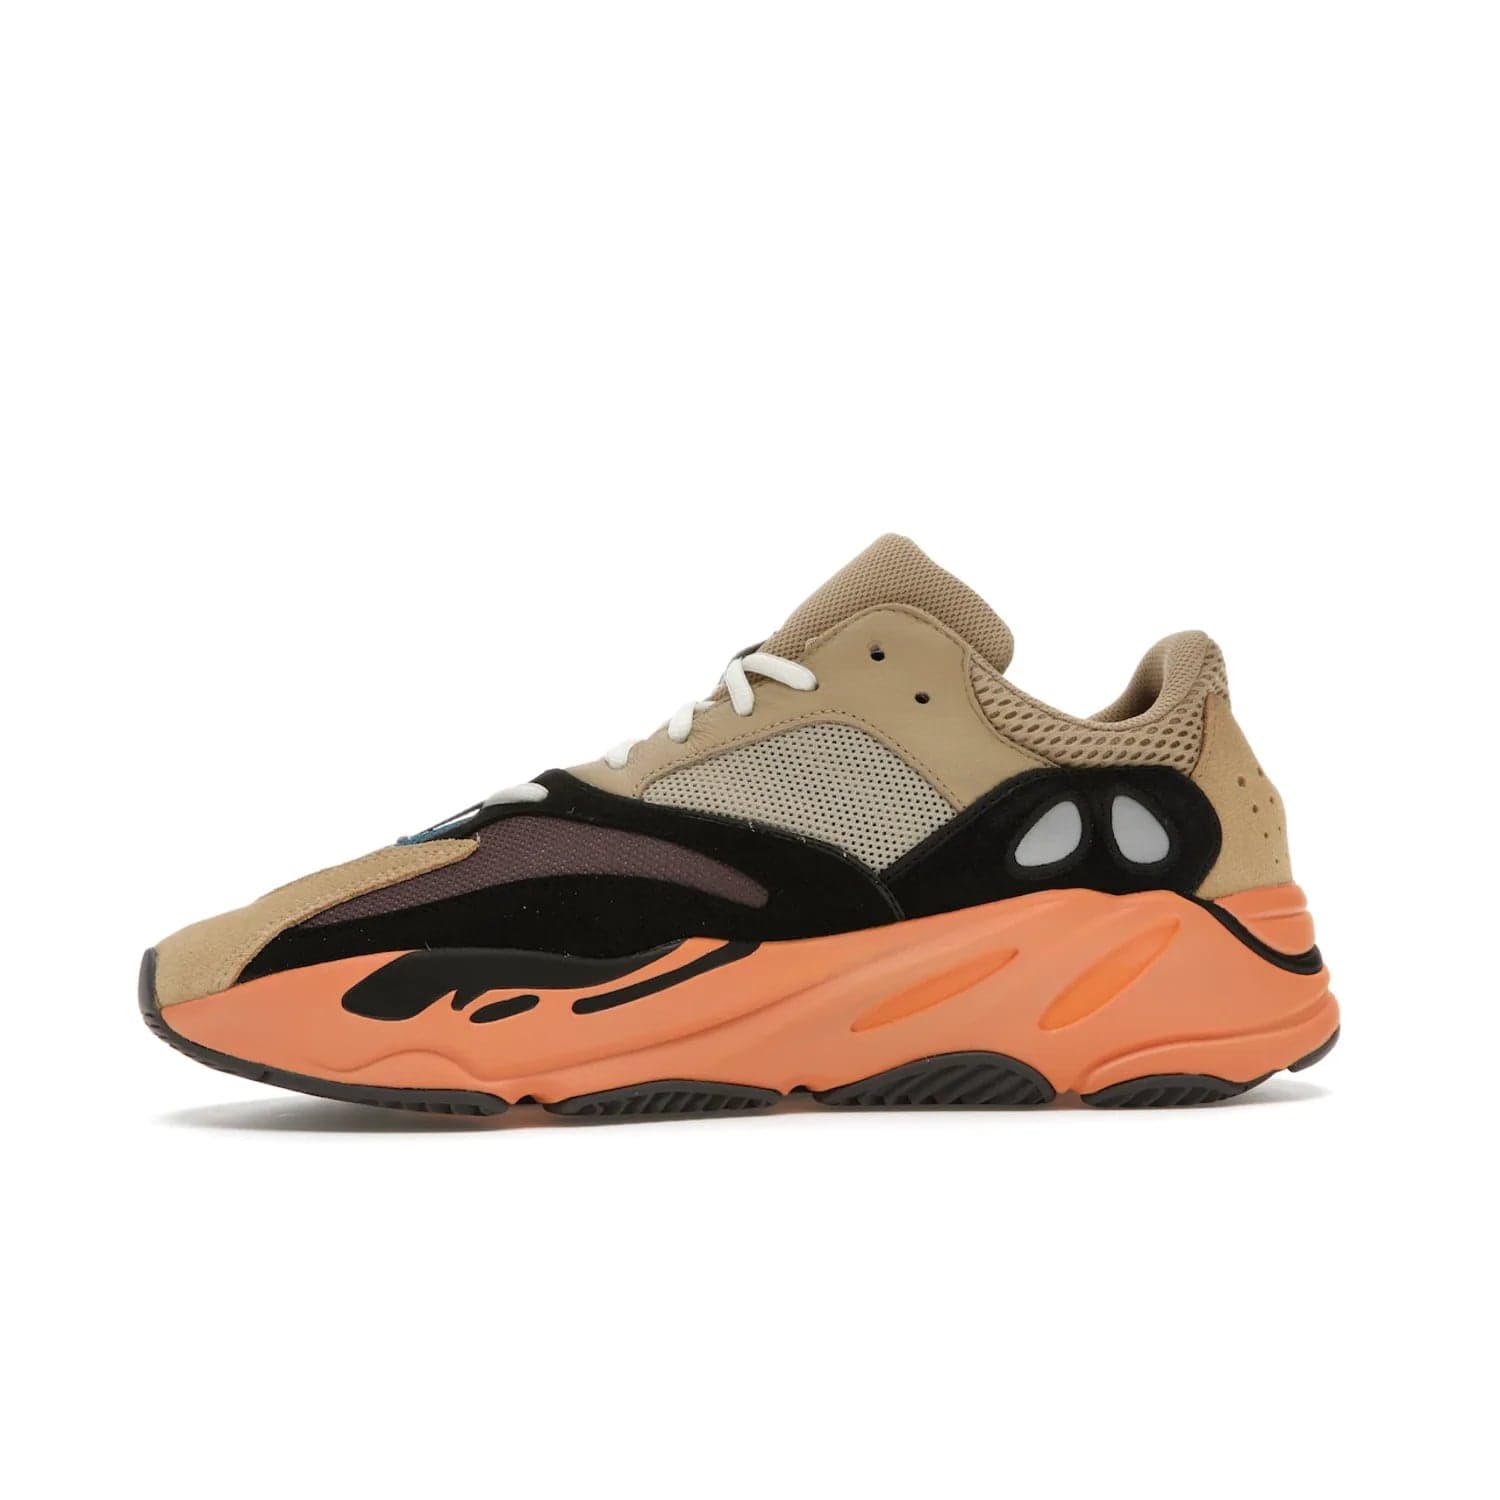 adidas Yeezy Boost 700 Enflame Amber - Image 18 - Only at www.BallersClubKickz.com - Adidas Yeezy Boost 700 Enflame Amber: Eye-catching design with pale yellow, brown, teal, and orange! Get yours in June 2021.